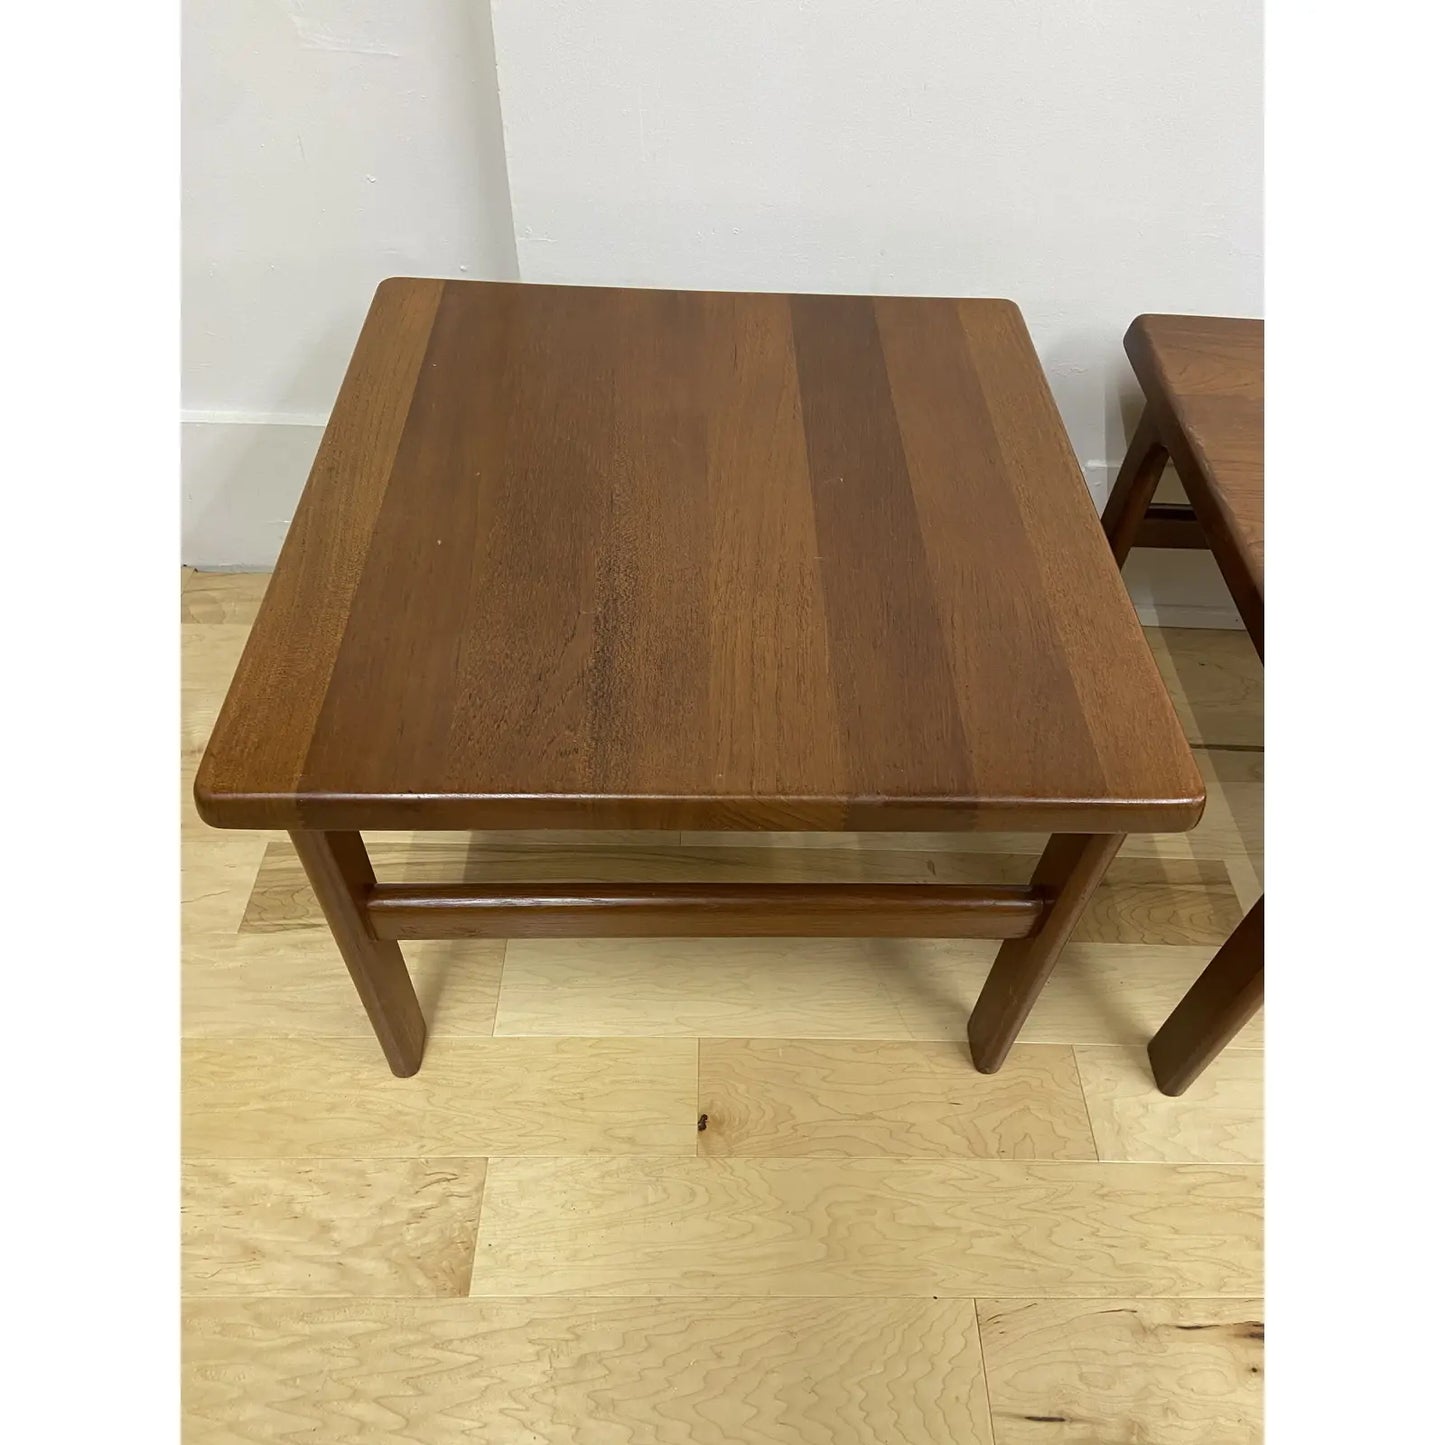 NEILS BACH SOLID TEAK END TABLES - PAIR